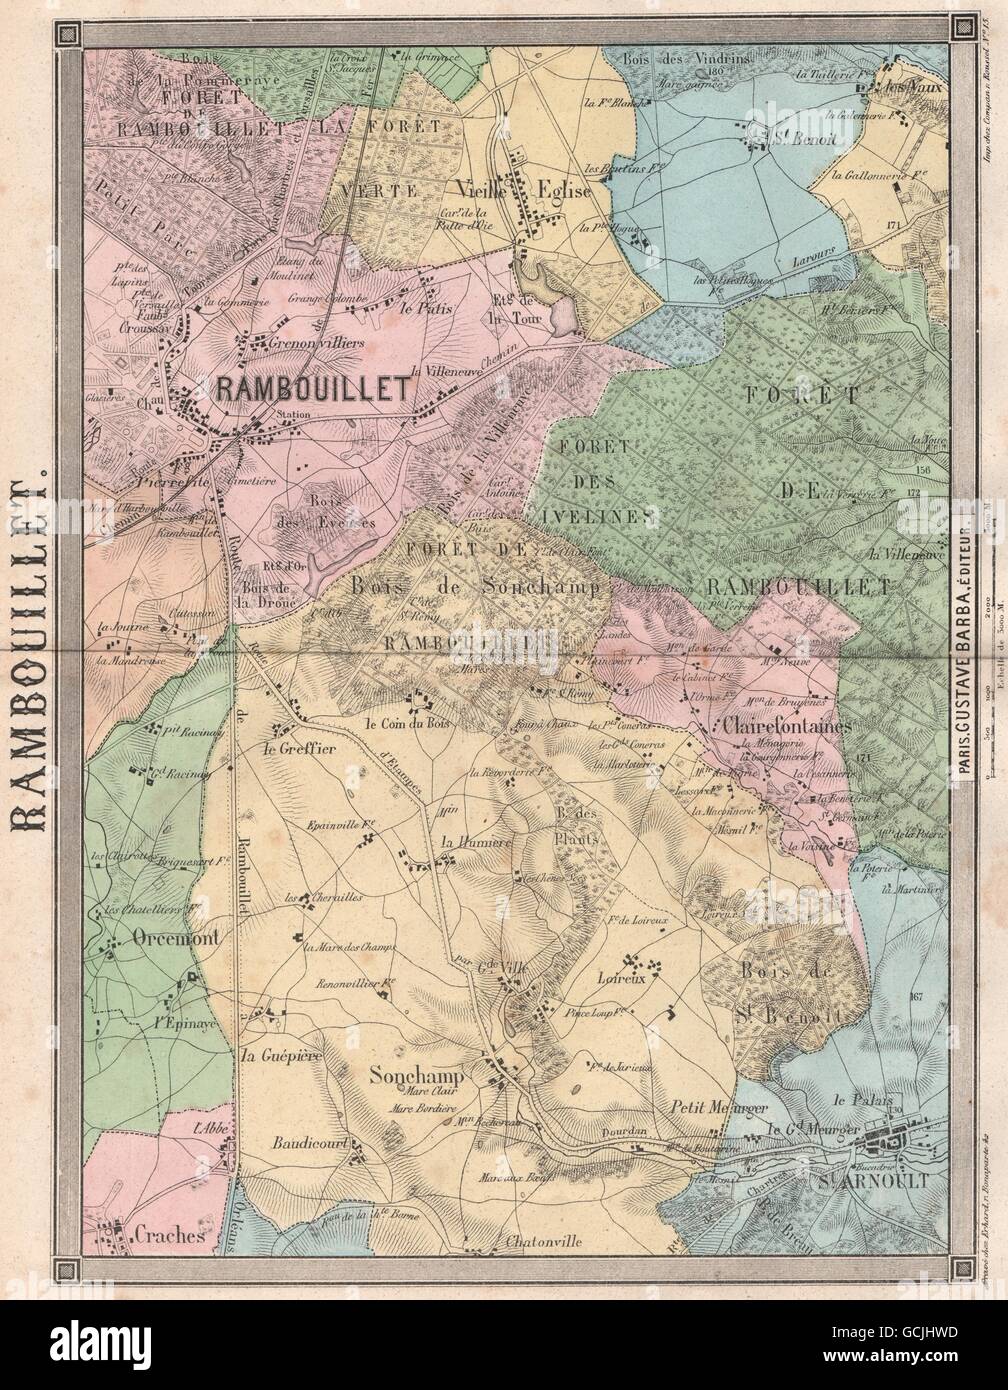 YVELINES. Rambouillet St Arnoult Sonchamp Clairefontaines Orcemont, 1860 map Stock Photo